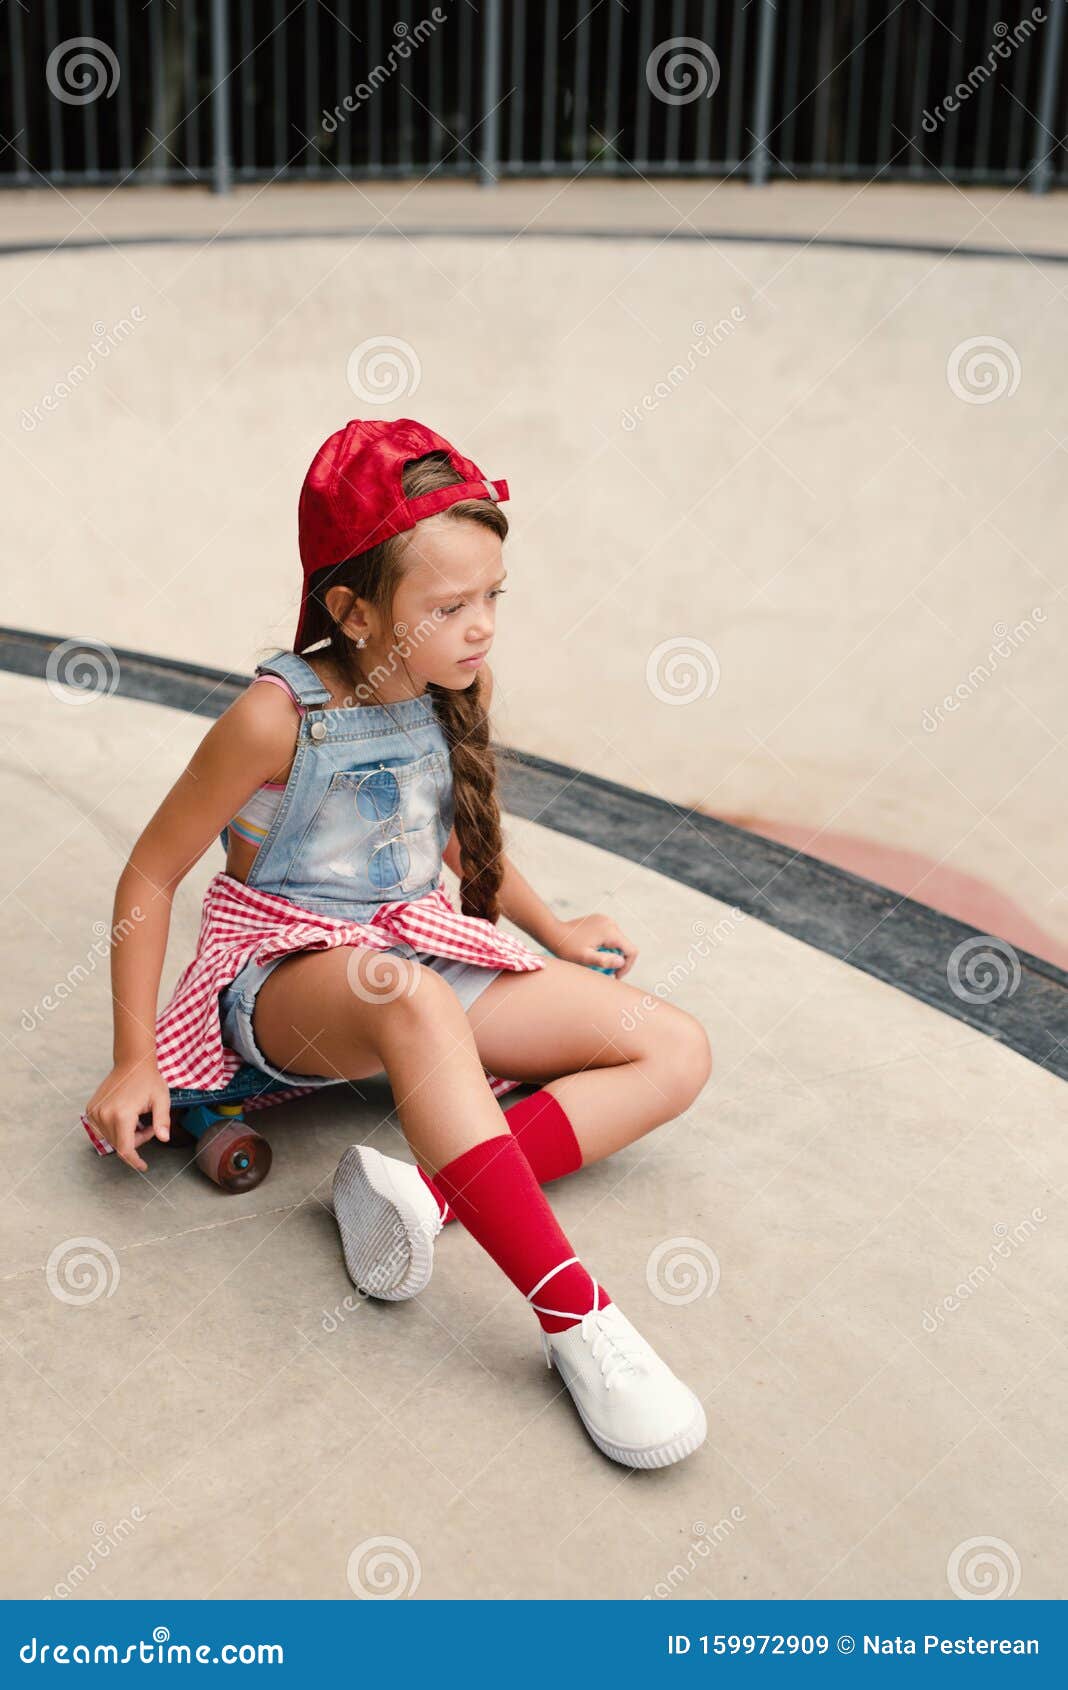 Little Cute Girl With Sunglasses And Cap Sitting On A Skateboard Photo Of Cute Preteen Girl